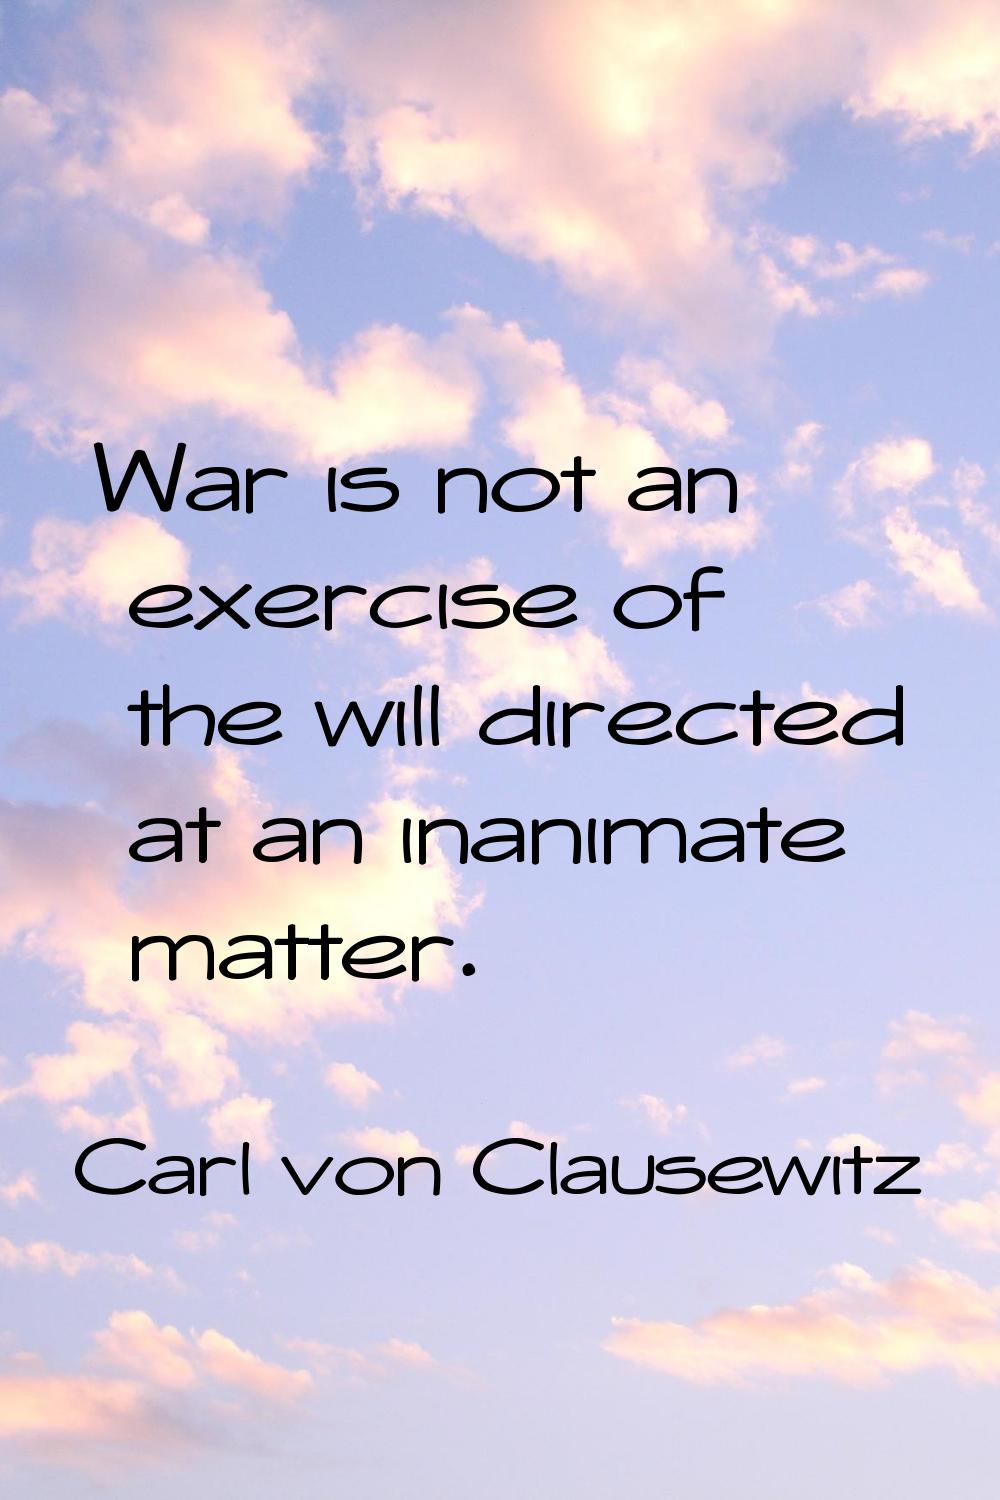 War is not an exercise of the will directed at an inanimate matter.